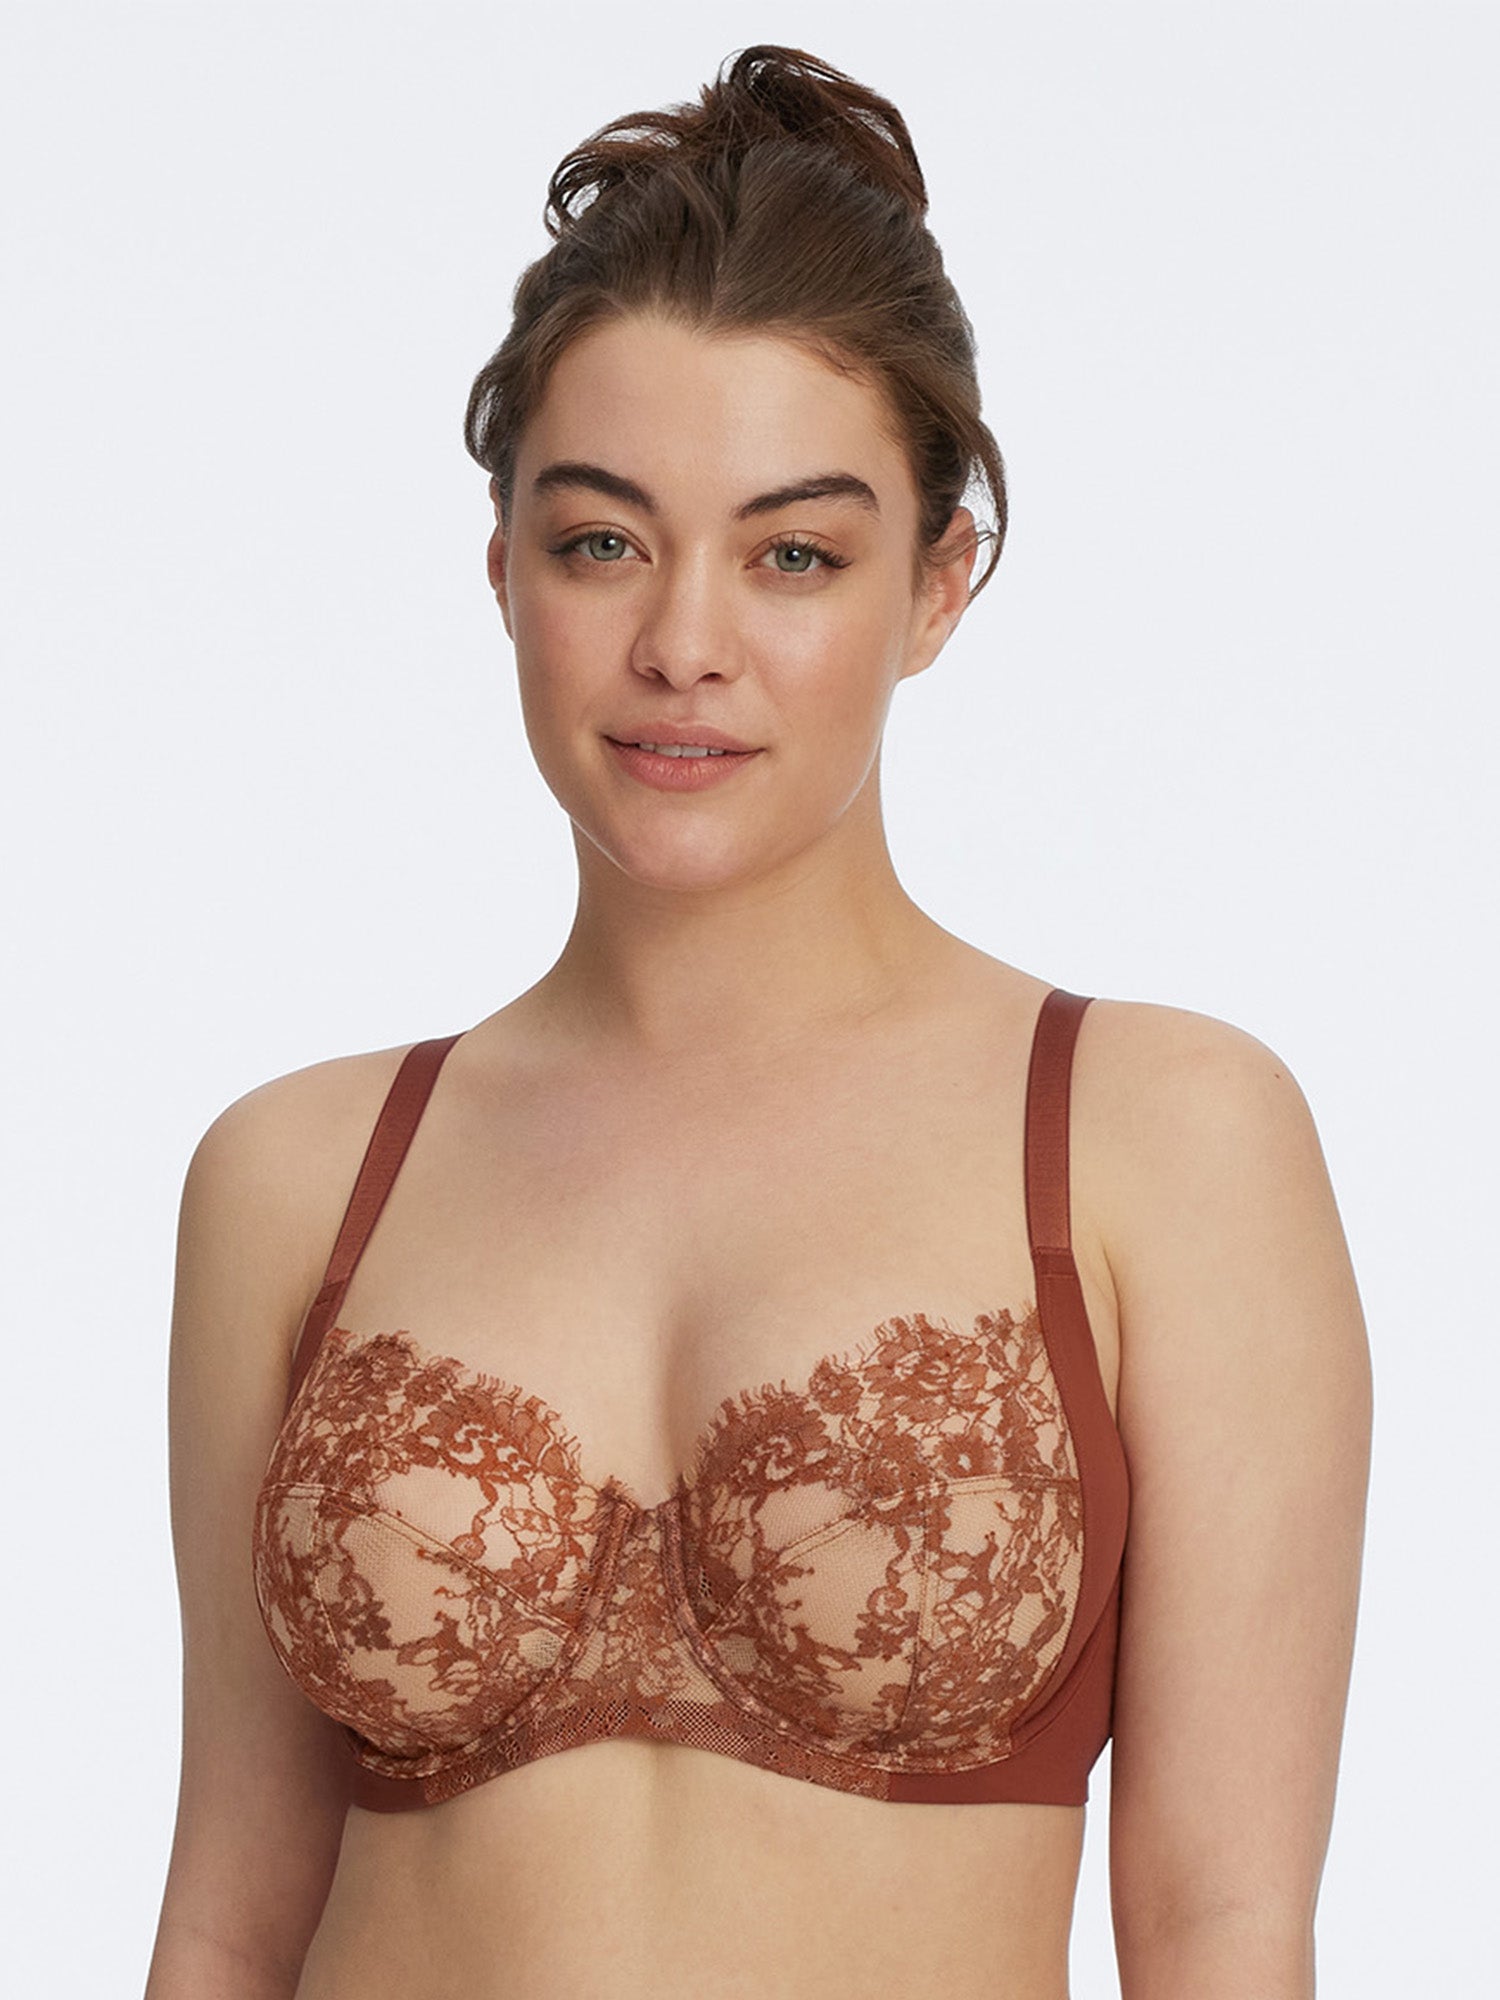 Women's Bra Full Coverage Underwire Support Unlined Plunge Front